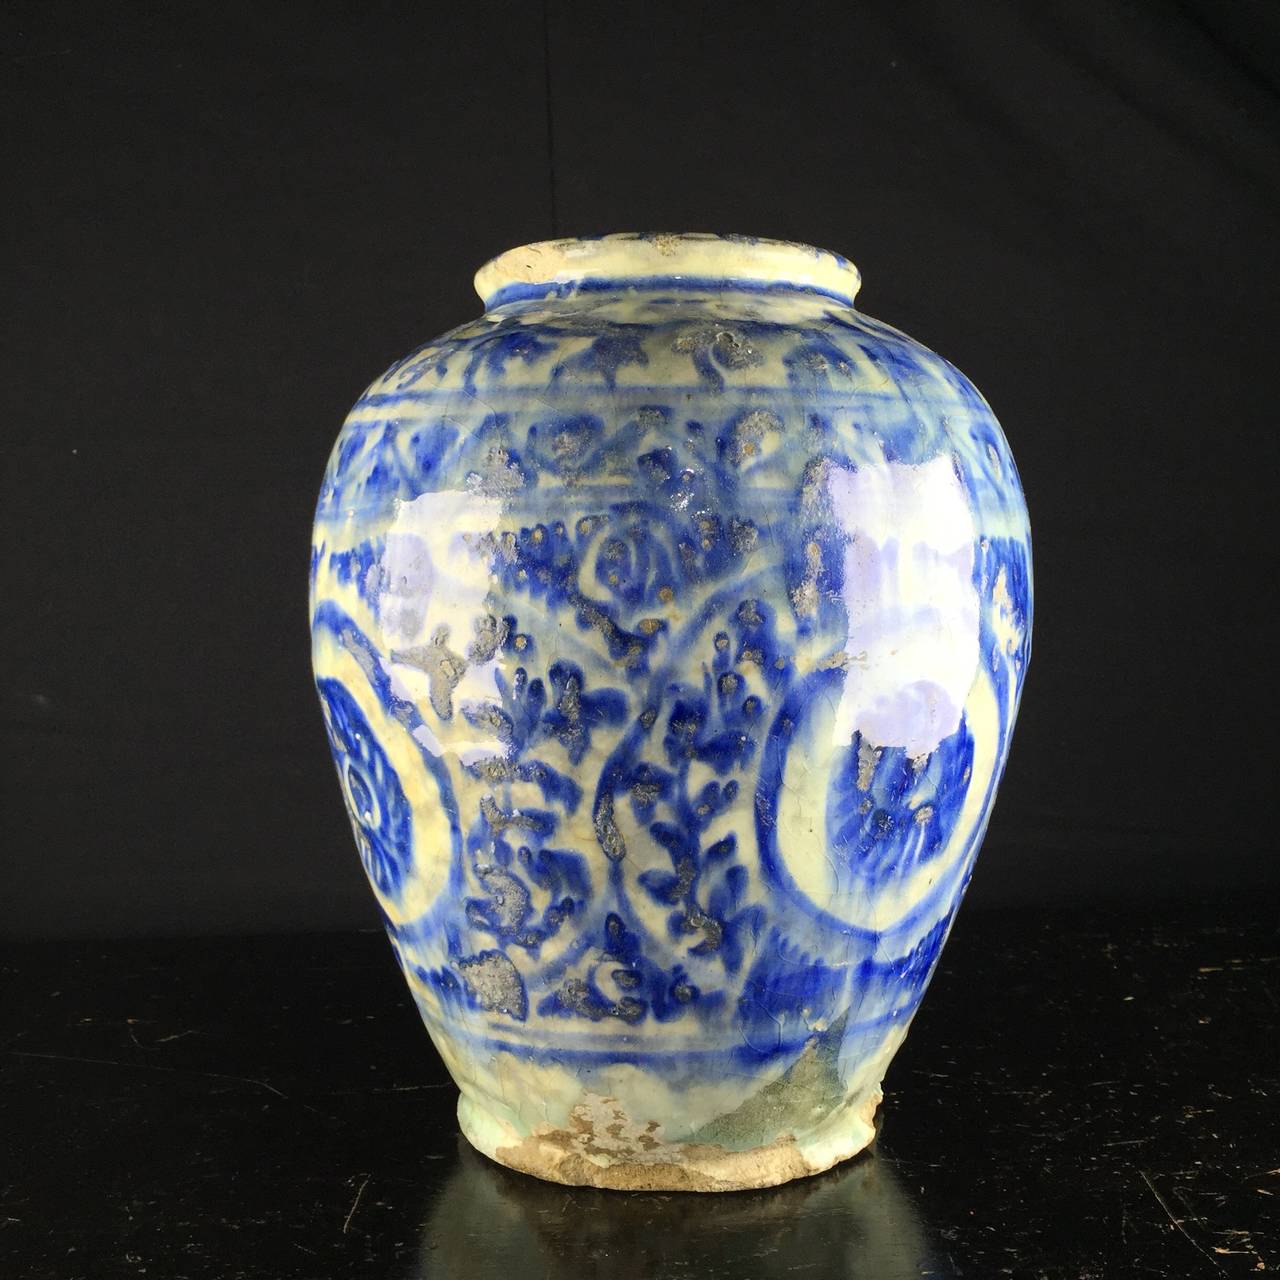 Islamic Fritware Jar with Blue and White Oriental Pattern, Mamluk 16th-17th Century